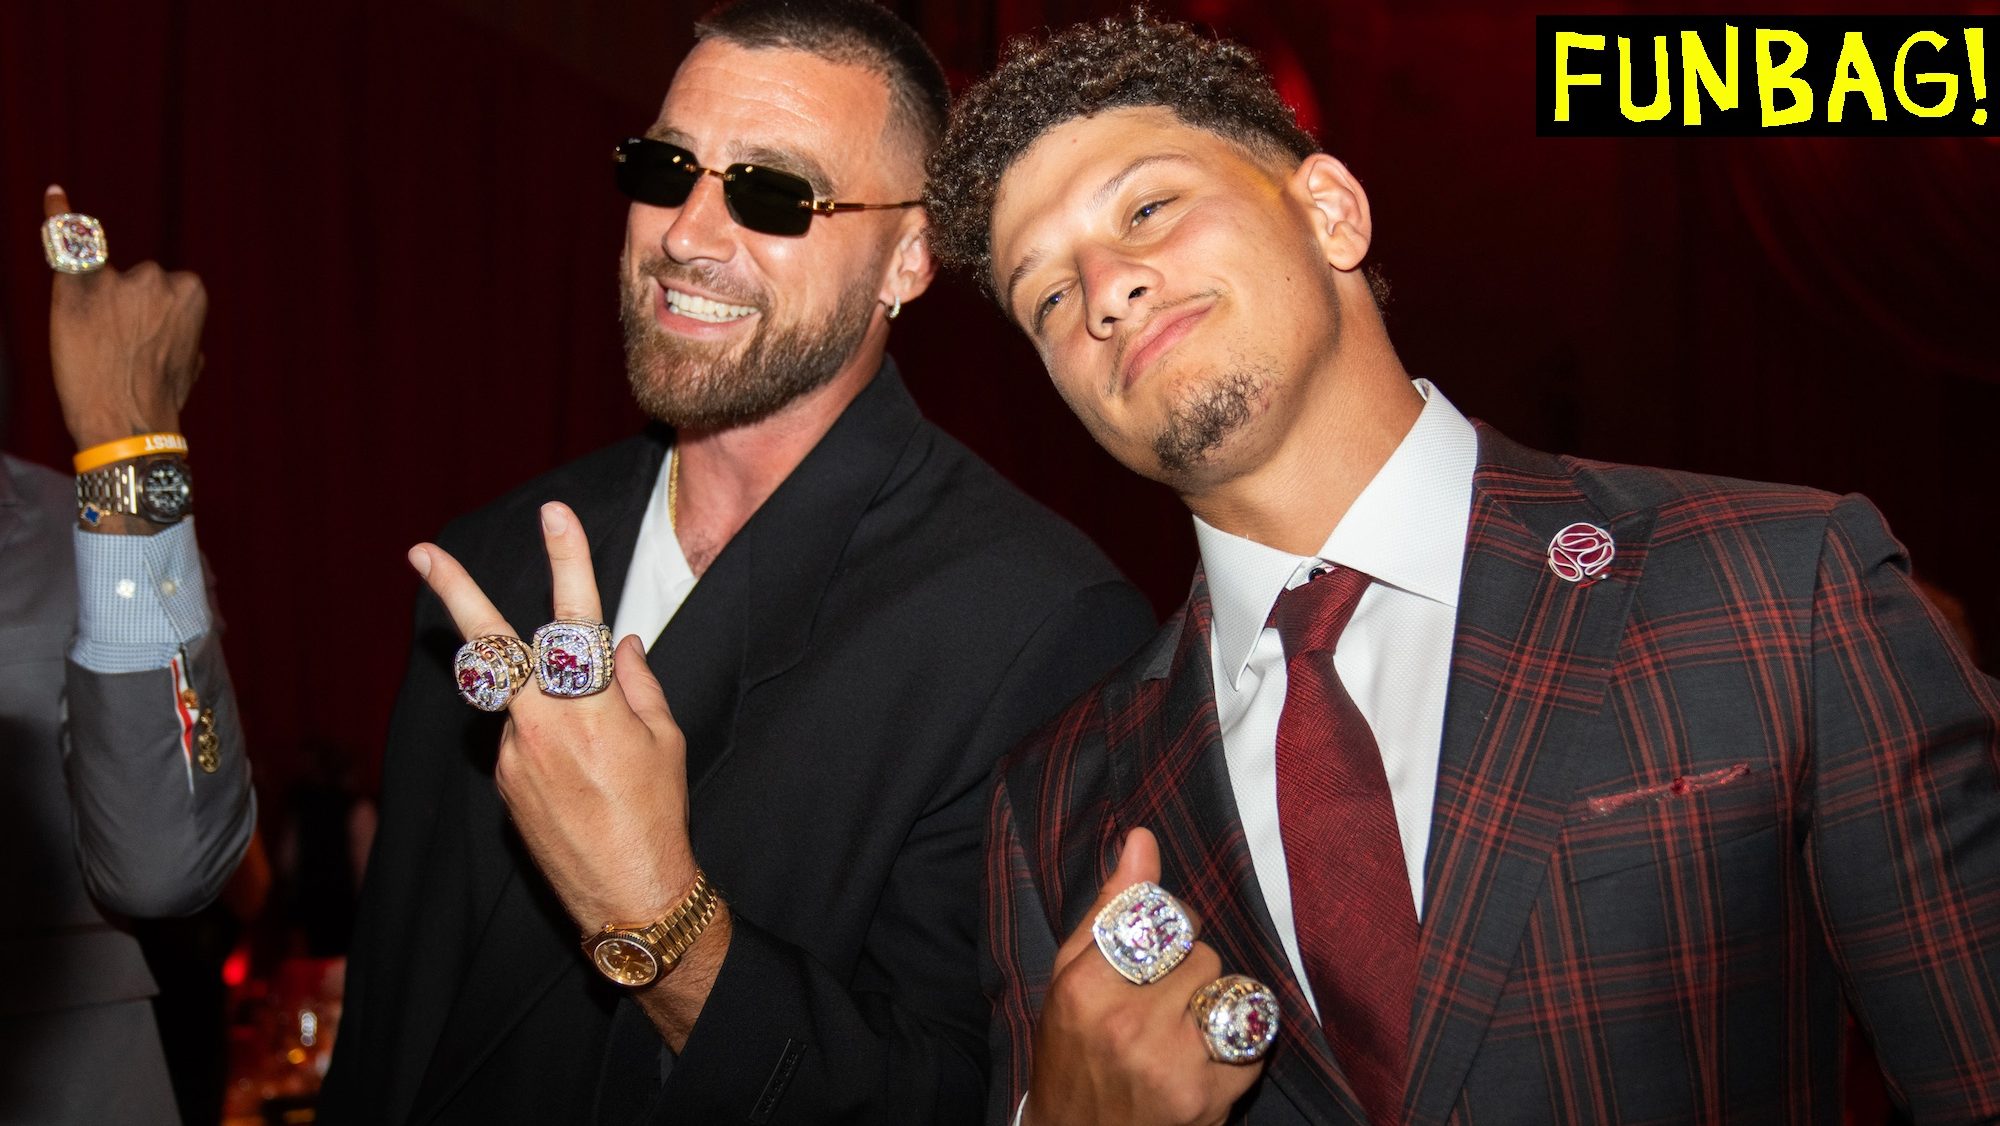 KANSAS CITY, MISSOURI - JUNE 15: In this handout image provided by the Kansas City Chiefs, Travis Kelce and Patrick Mahomes of the Kansas City Chiefs pose during the Kansas City Chiefs Super Bowl LVII Ring Ceremony at Union Station on June 15, 2023 in Kansas City, Missouri. (Photo by Handout/Kansas City Chiefs via Getty Images)